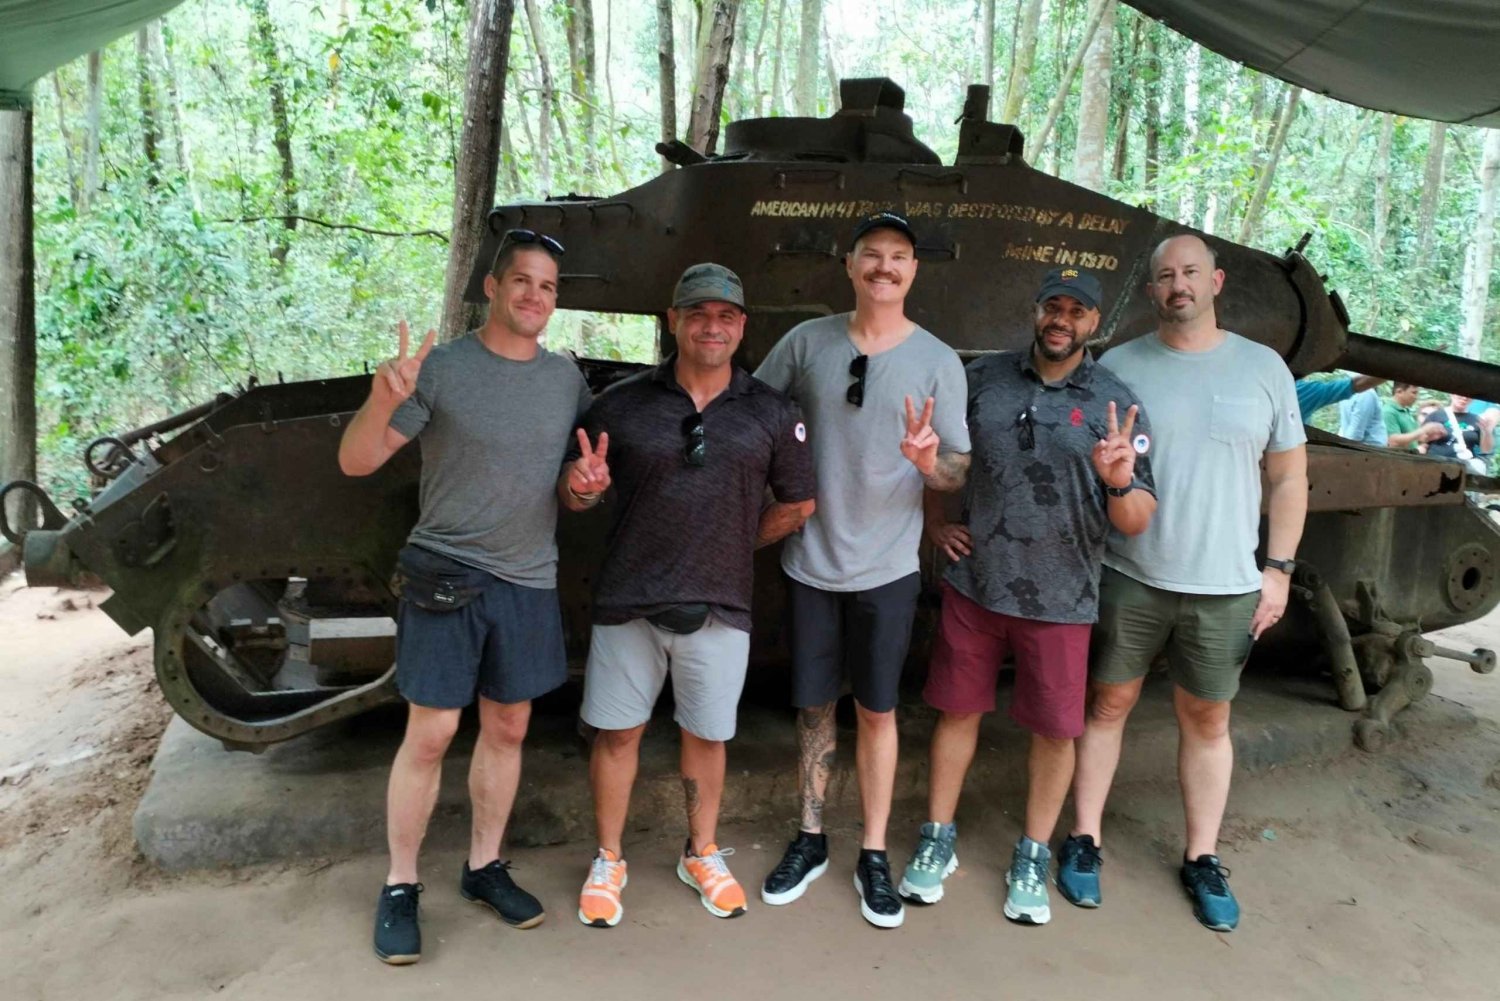 Morning Cu Chi Tunnels - Join Small Group By Van